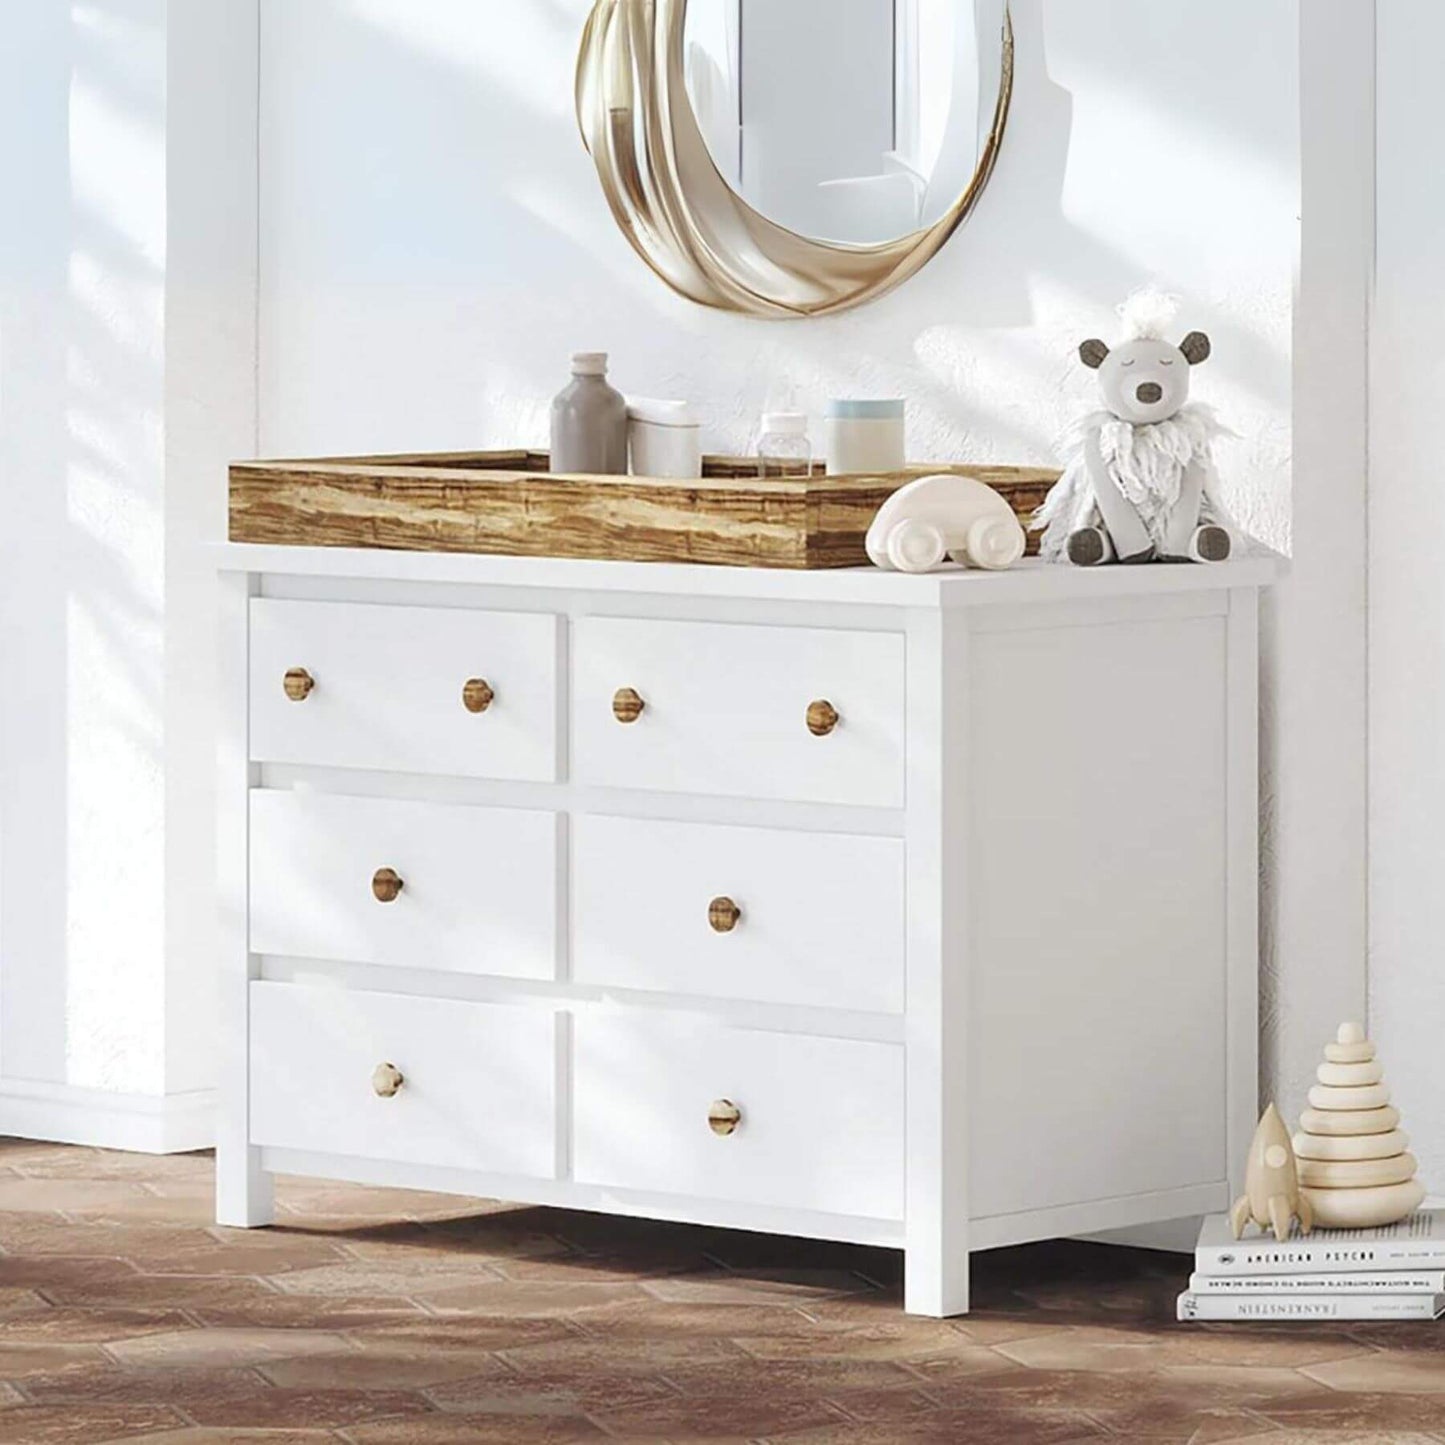 Milk Street Baby Acacia Knobs for Branch Double Dresser - Lifestyle